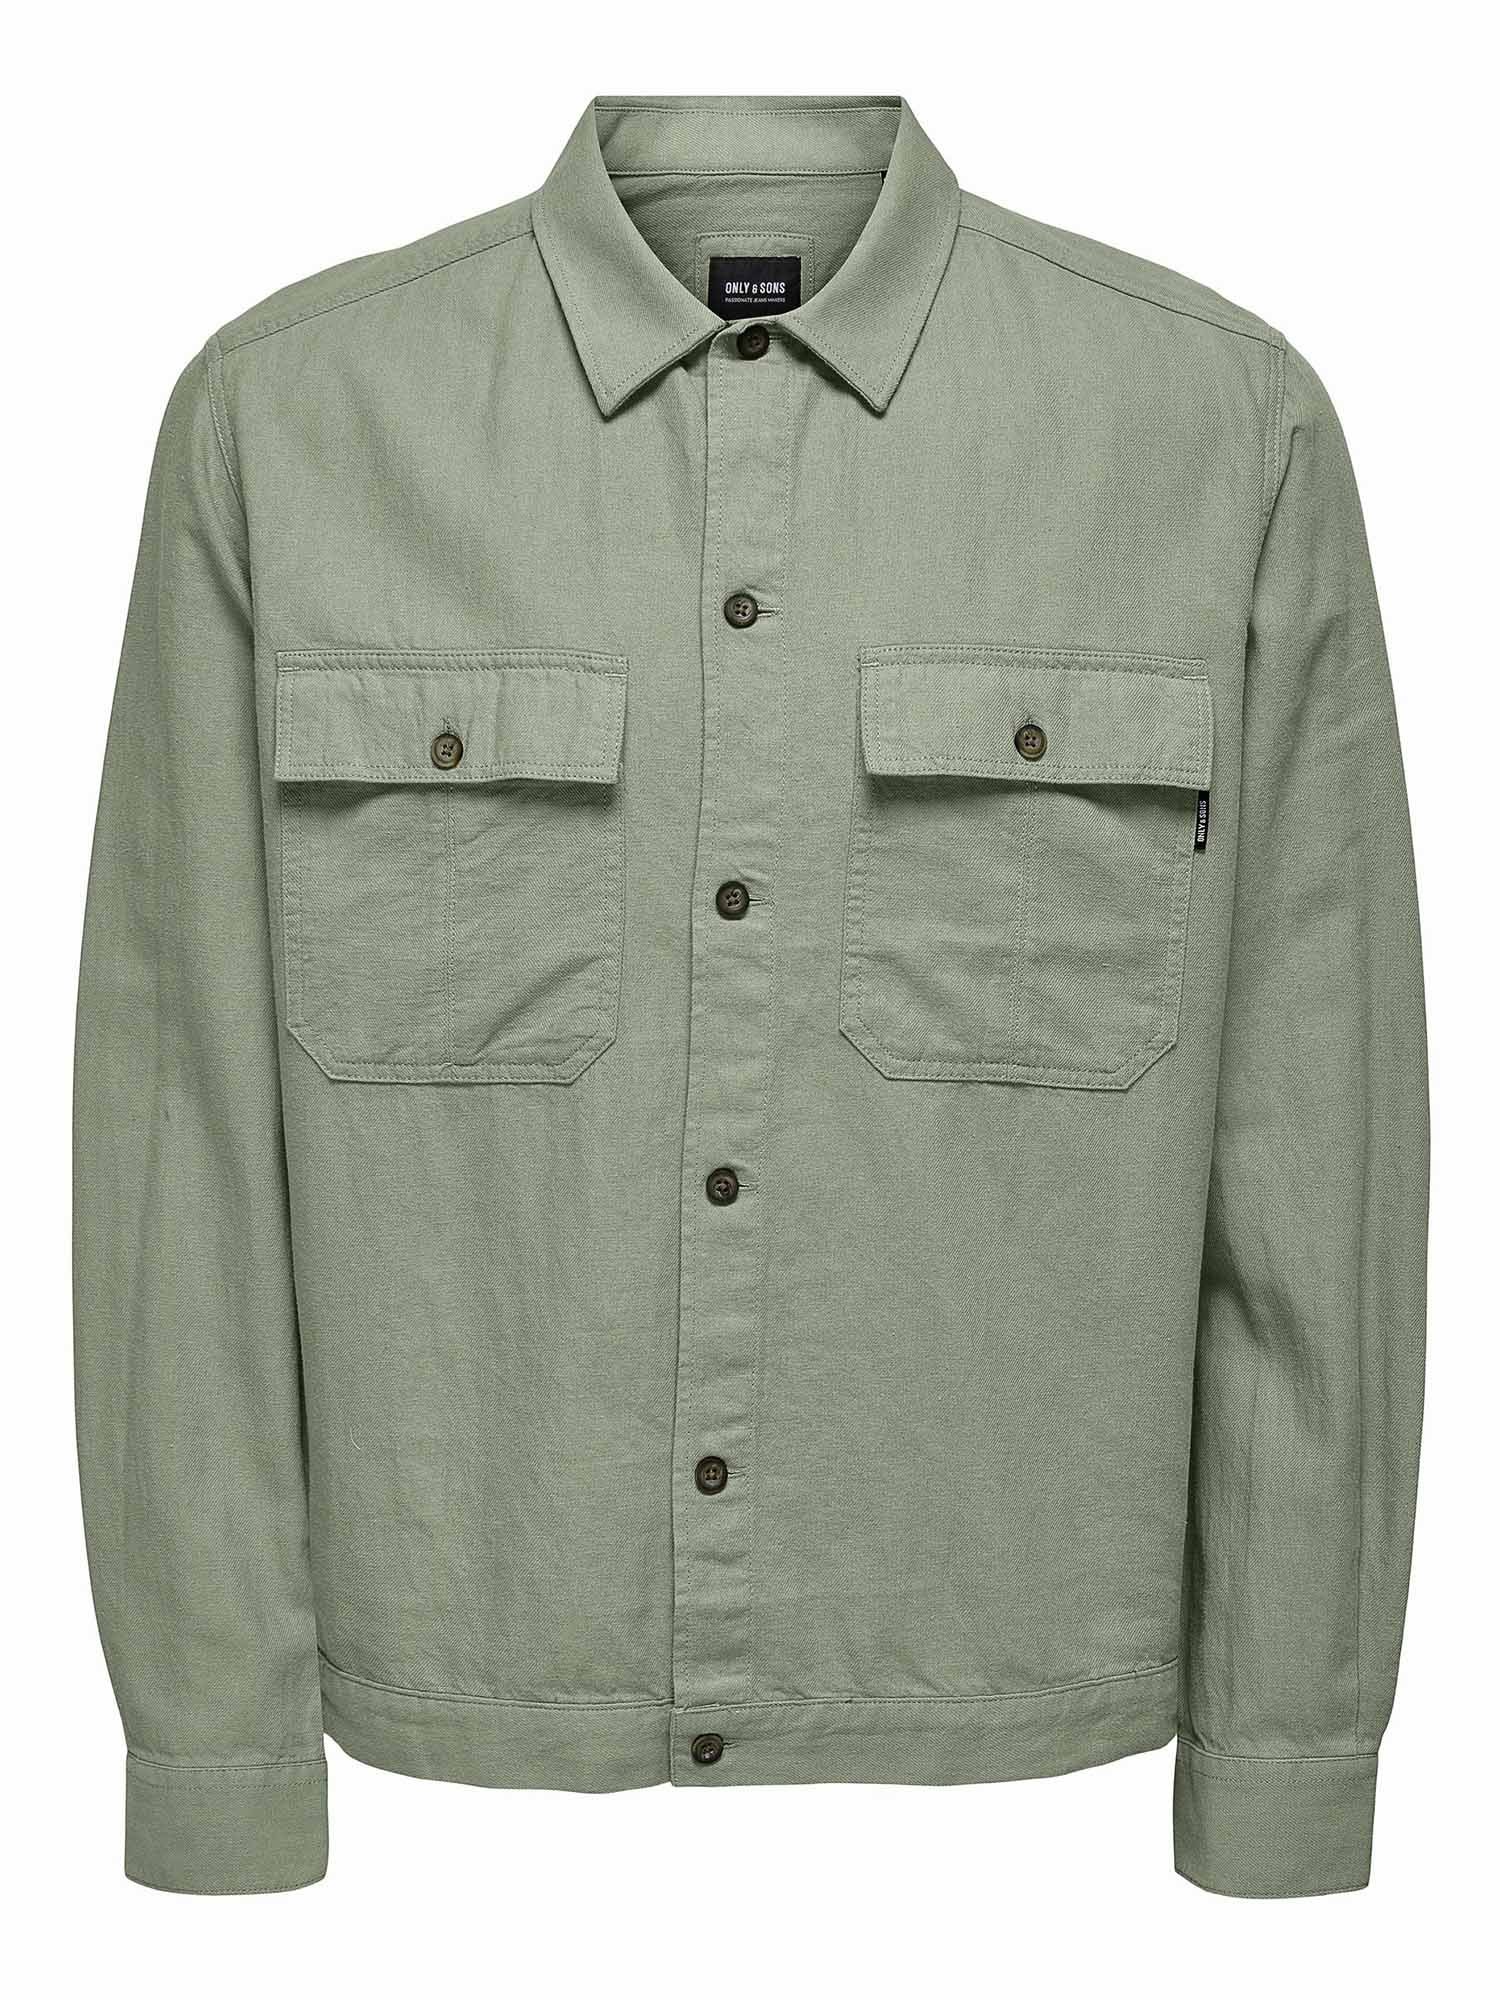 ONLY&SONS N. KENNET - VERDE MILITARE